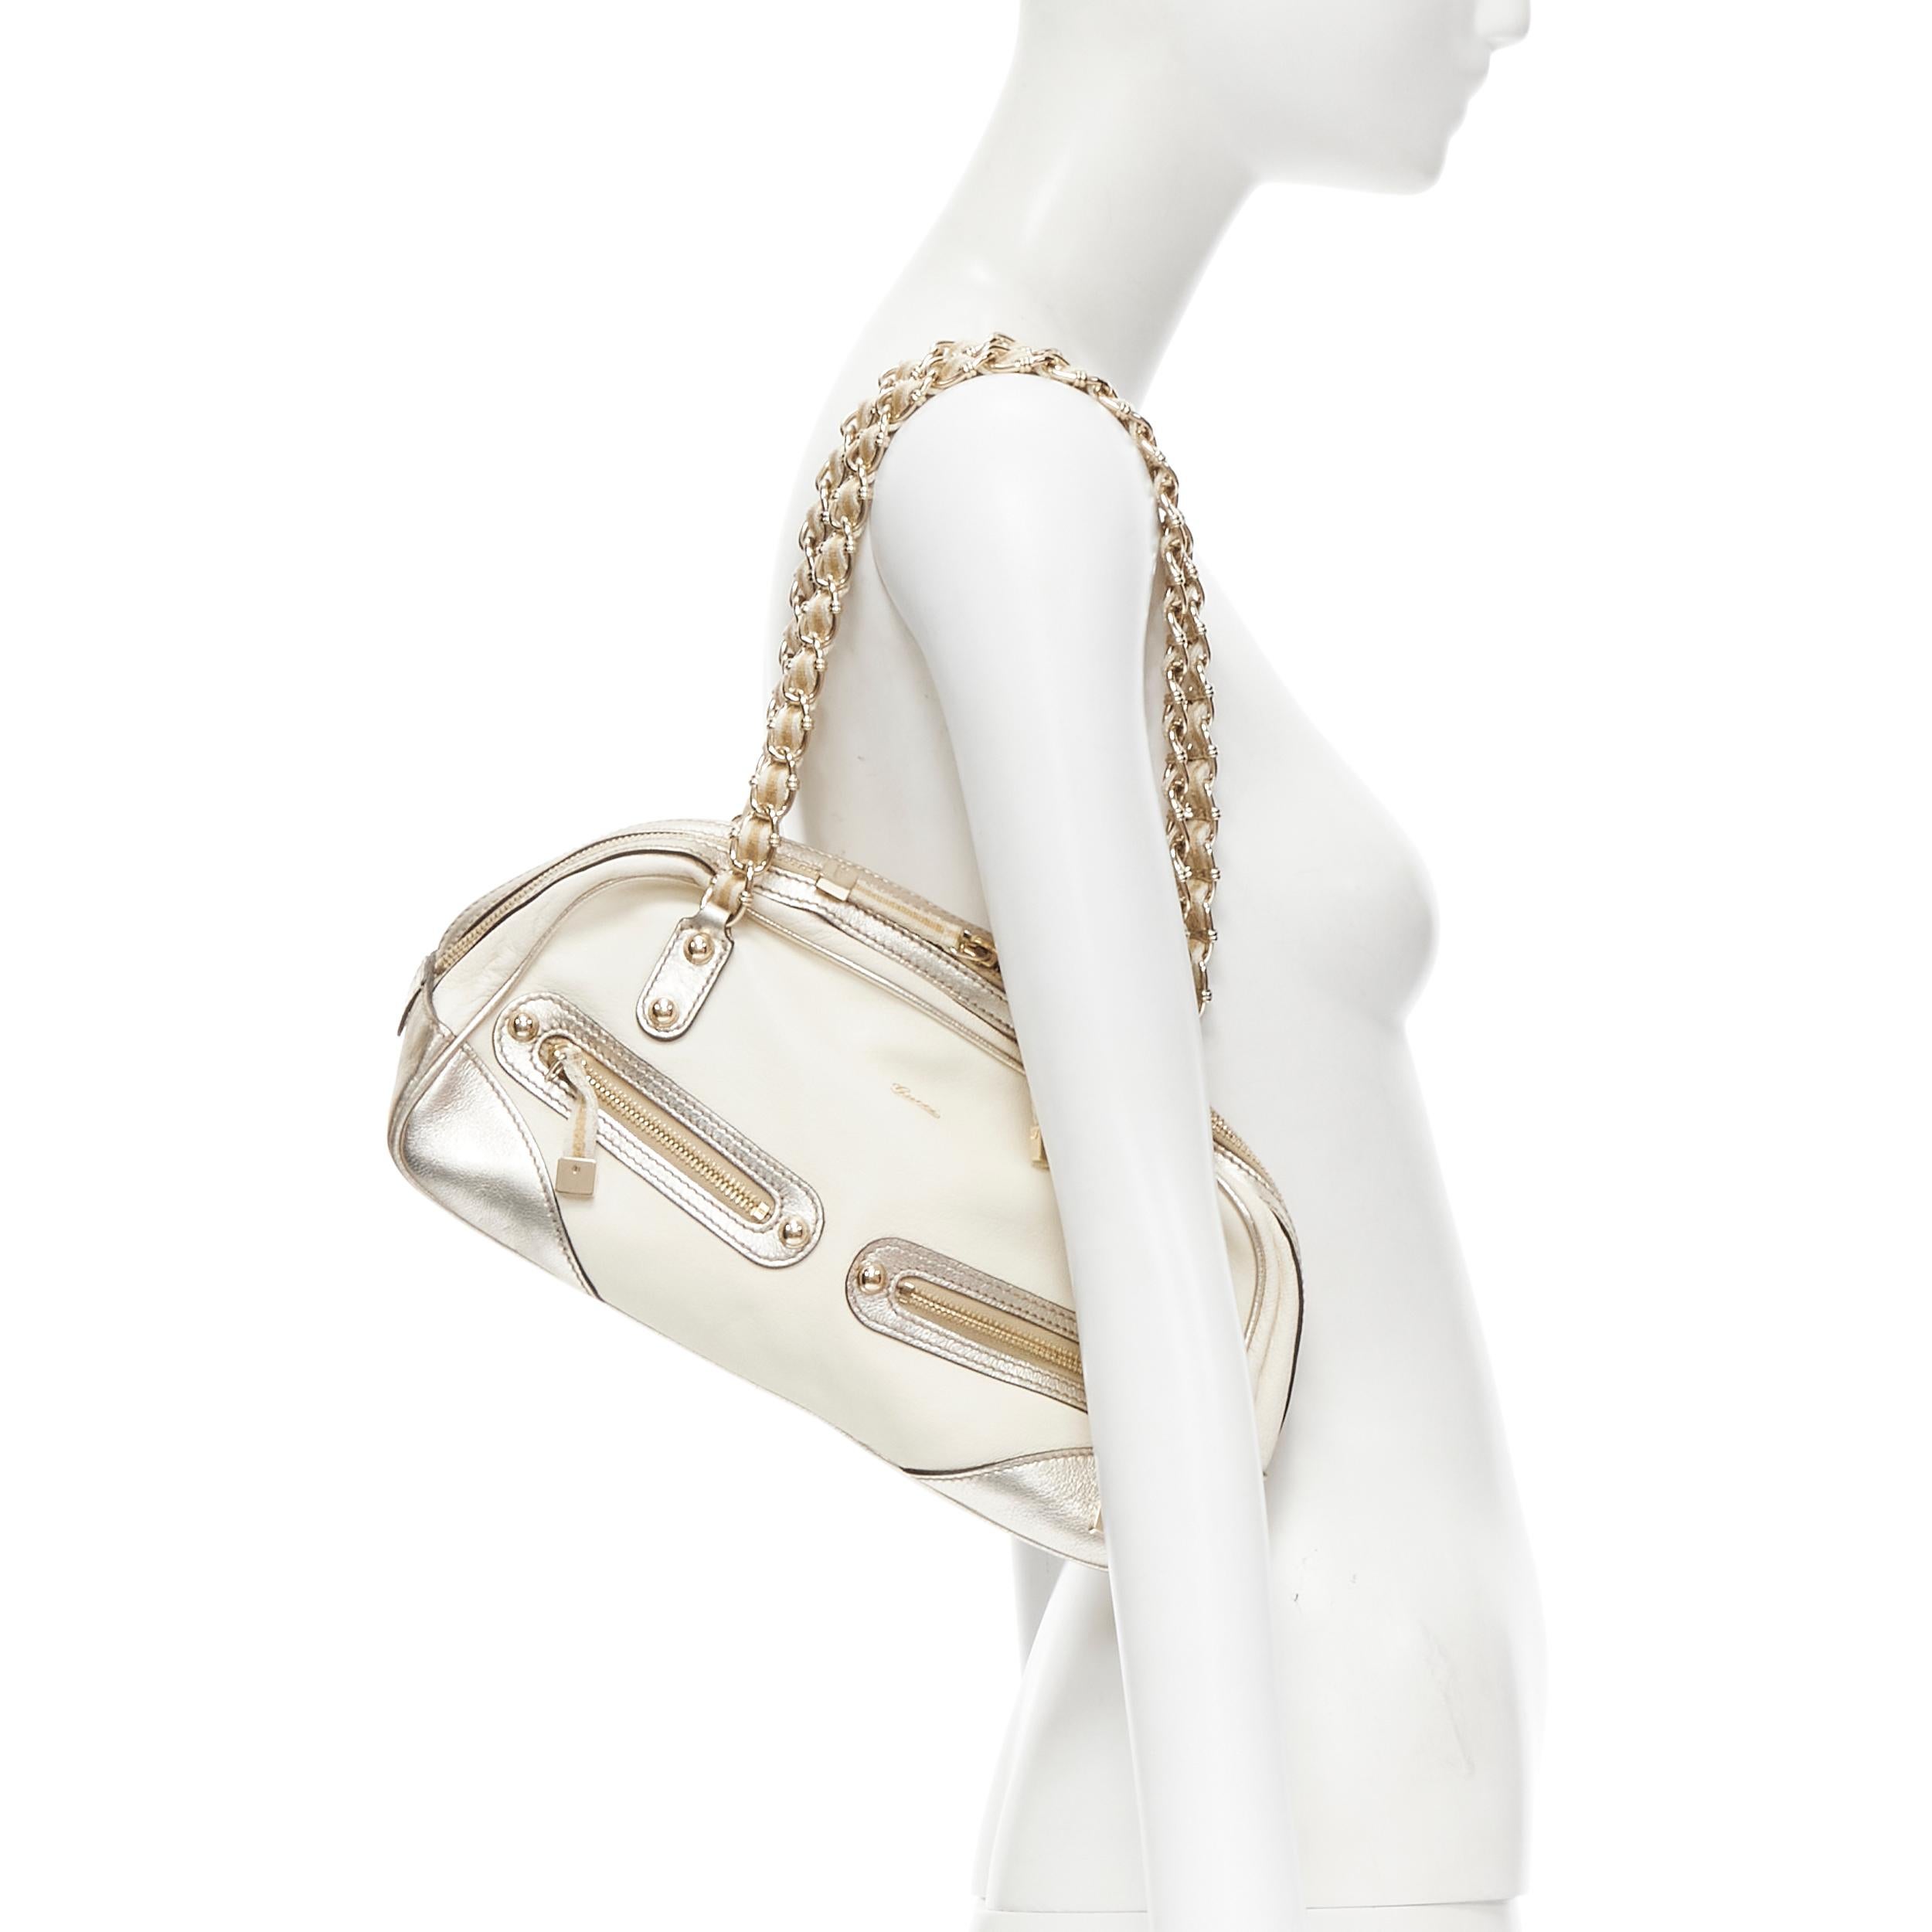 GUCCI 152462 Capri cream gold leather web zip chain handle shoulder bag 
Reference: CELG/A00033 
Brand: Gucci 
Model: Capri 
Material: Leather 
Color: White 
Pattern: Solid 
Closure: Zip 
Extra Detail: 152462. Cream white soft leather with metallic